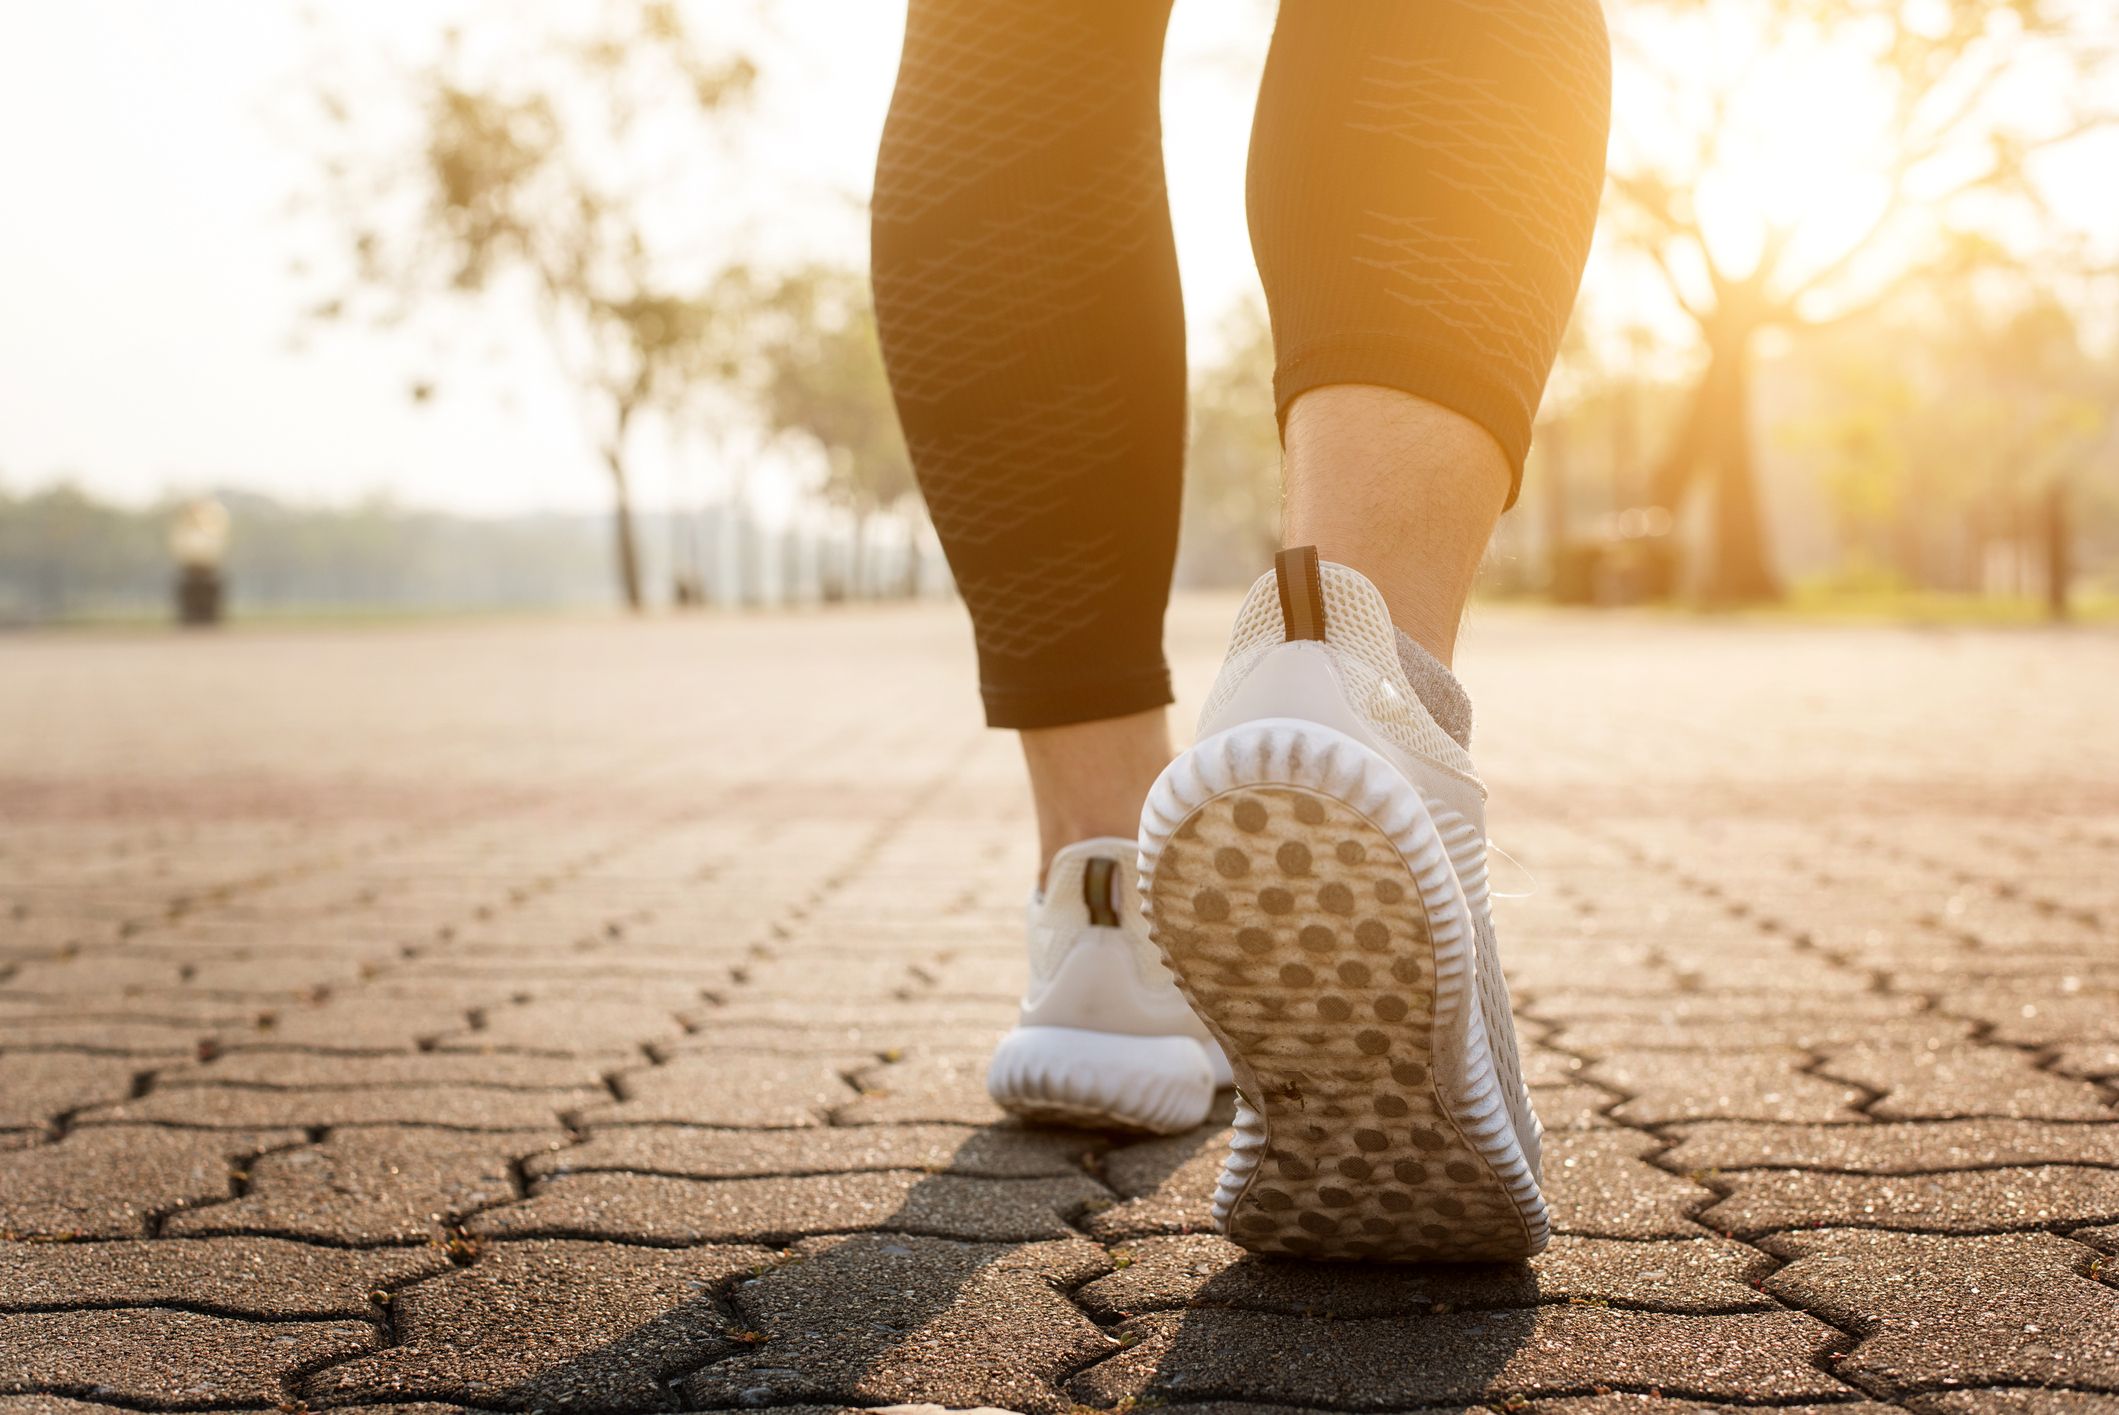 Calories Burned Walking: How to Calculate by Weight, Pace & Time